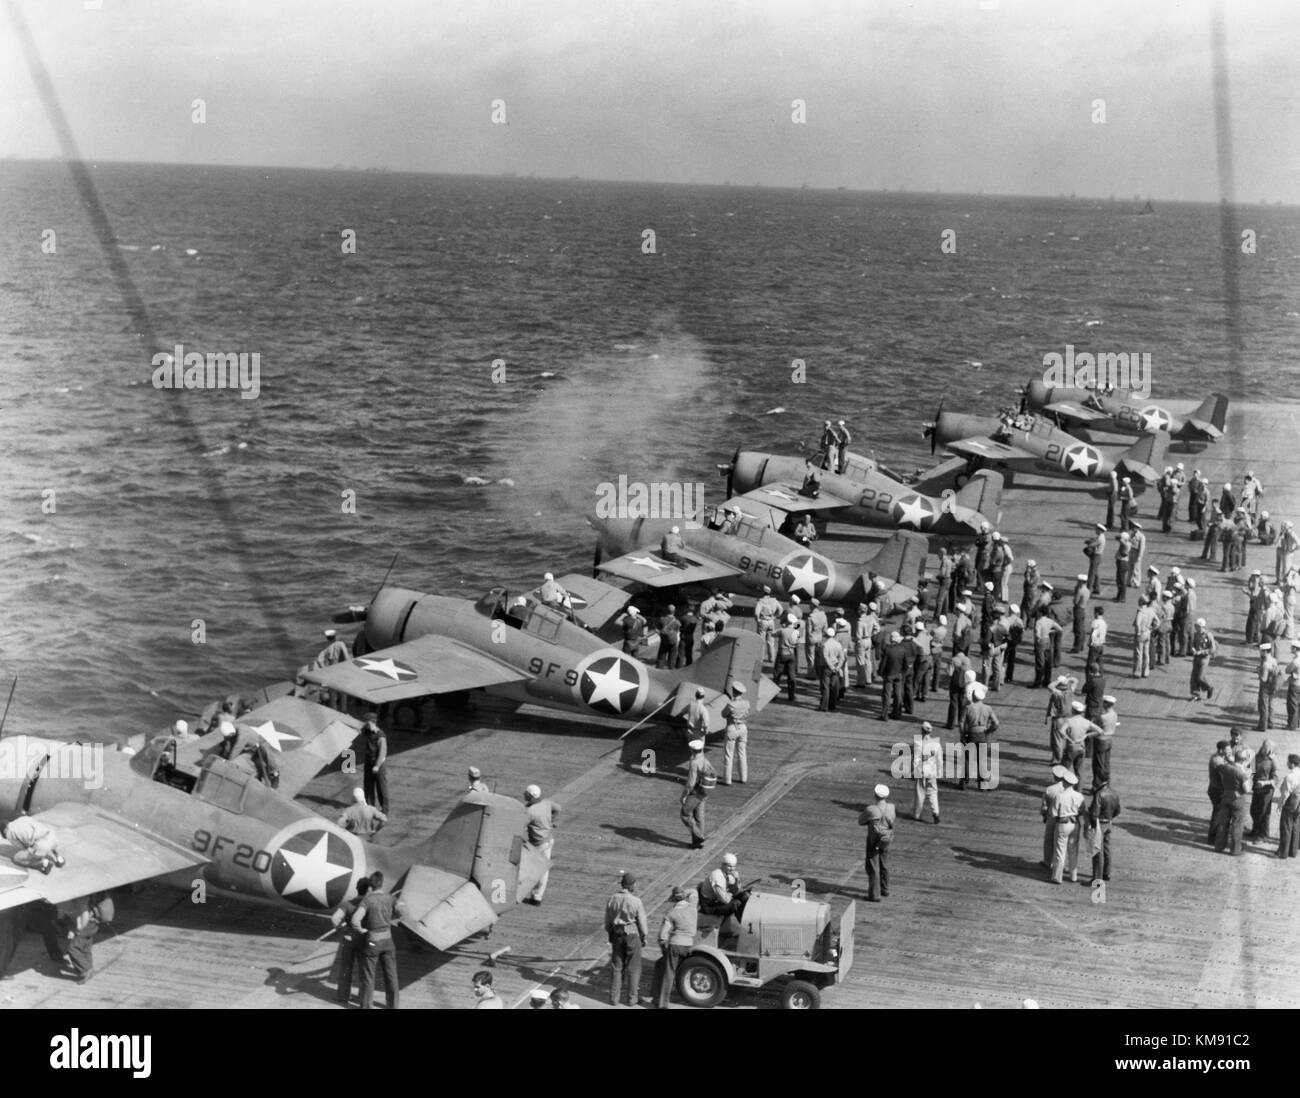 Testing machine guns of Grumman F4F-4 Wildcat fighters aboard USS Ranger (CV-4), while en route from the U.S. to North African waters, circa early November 1942. Note the special markings used during this operation, with a yellow ring painted around the national insignia on aircraft fuselages. Operation Torch Stock Photo